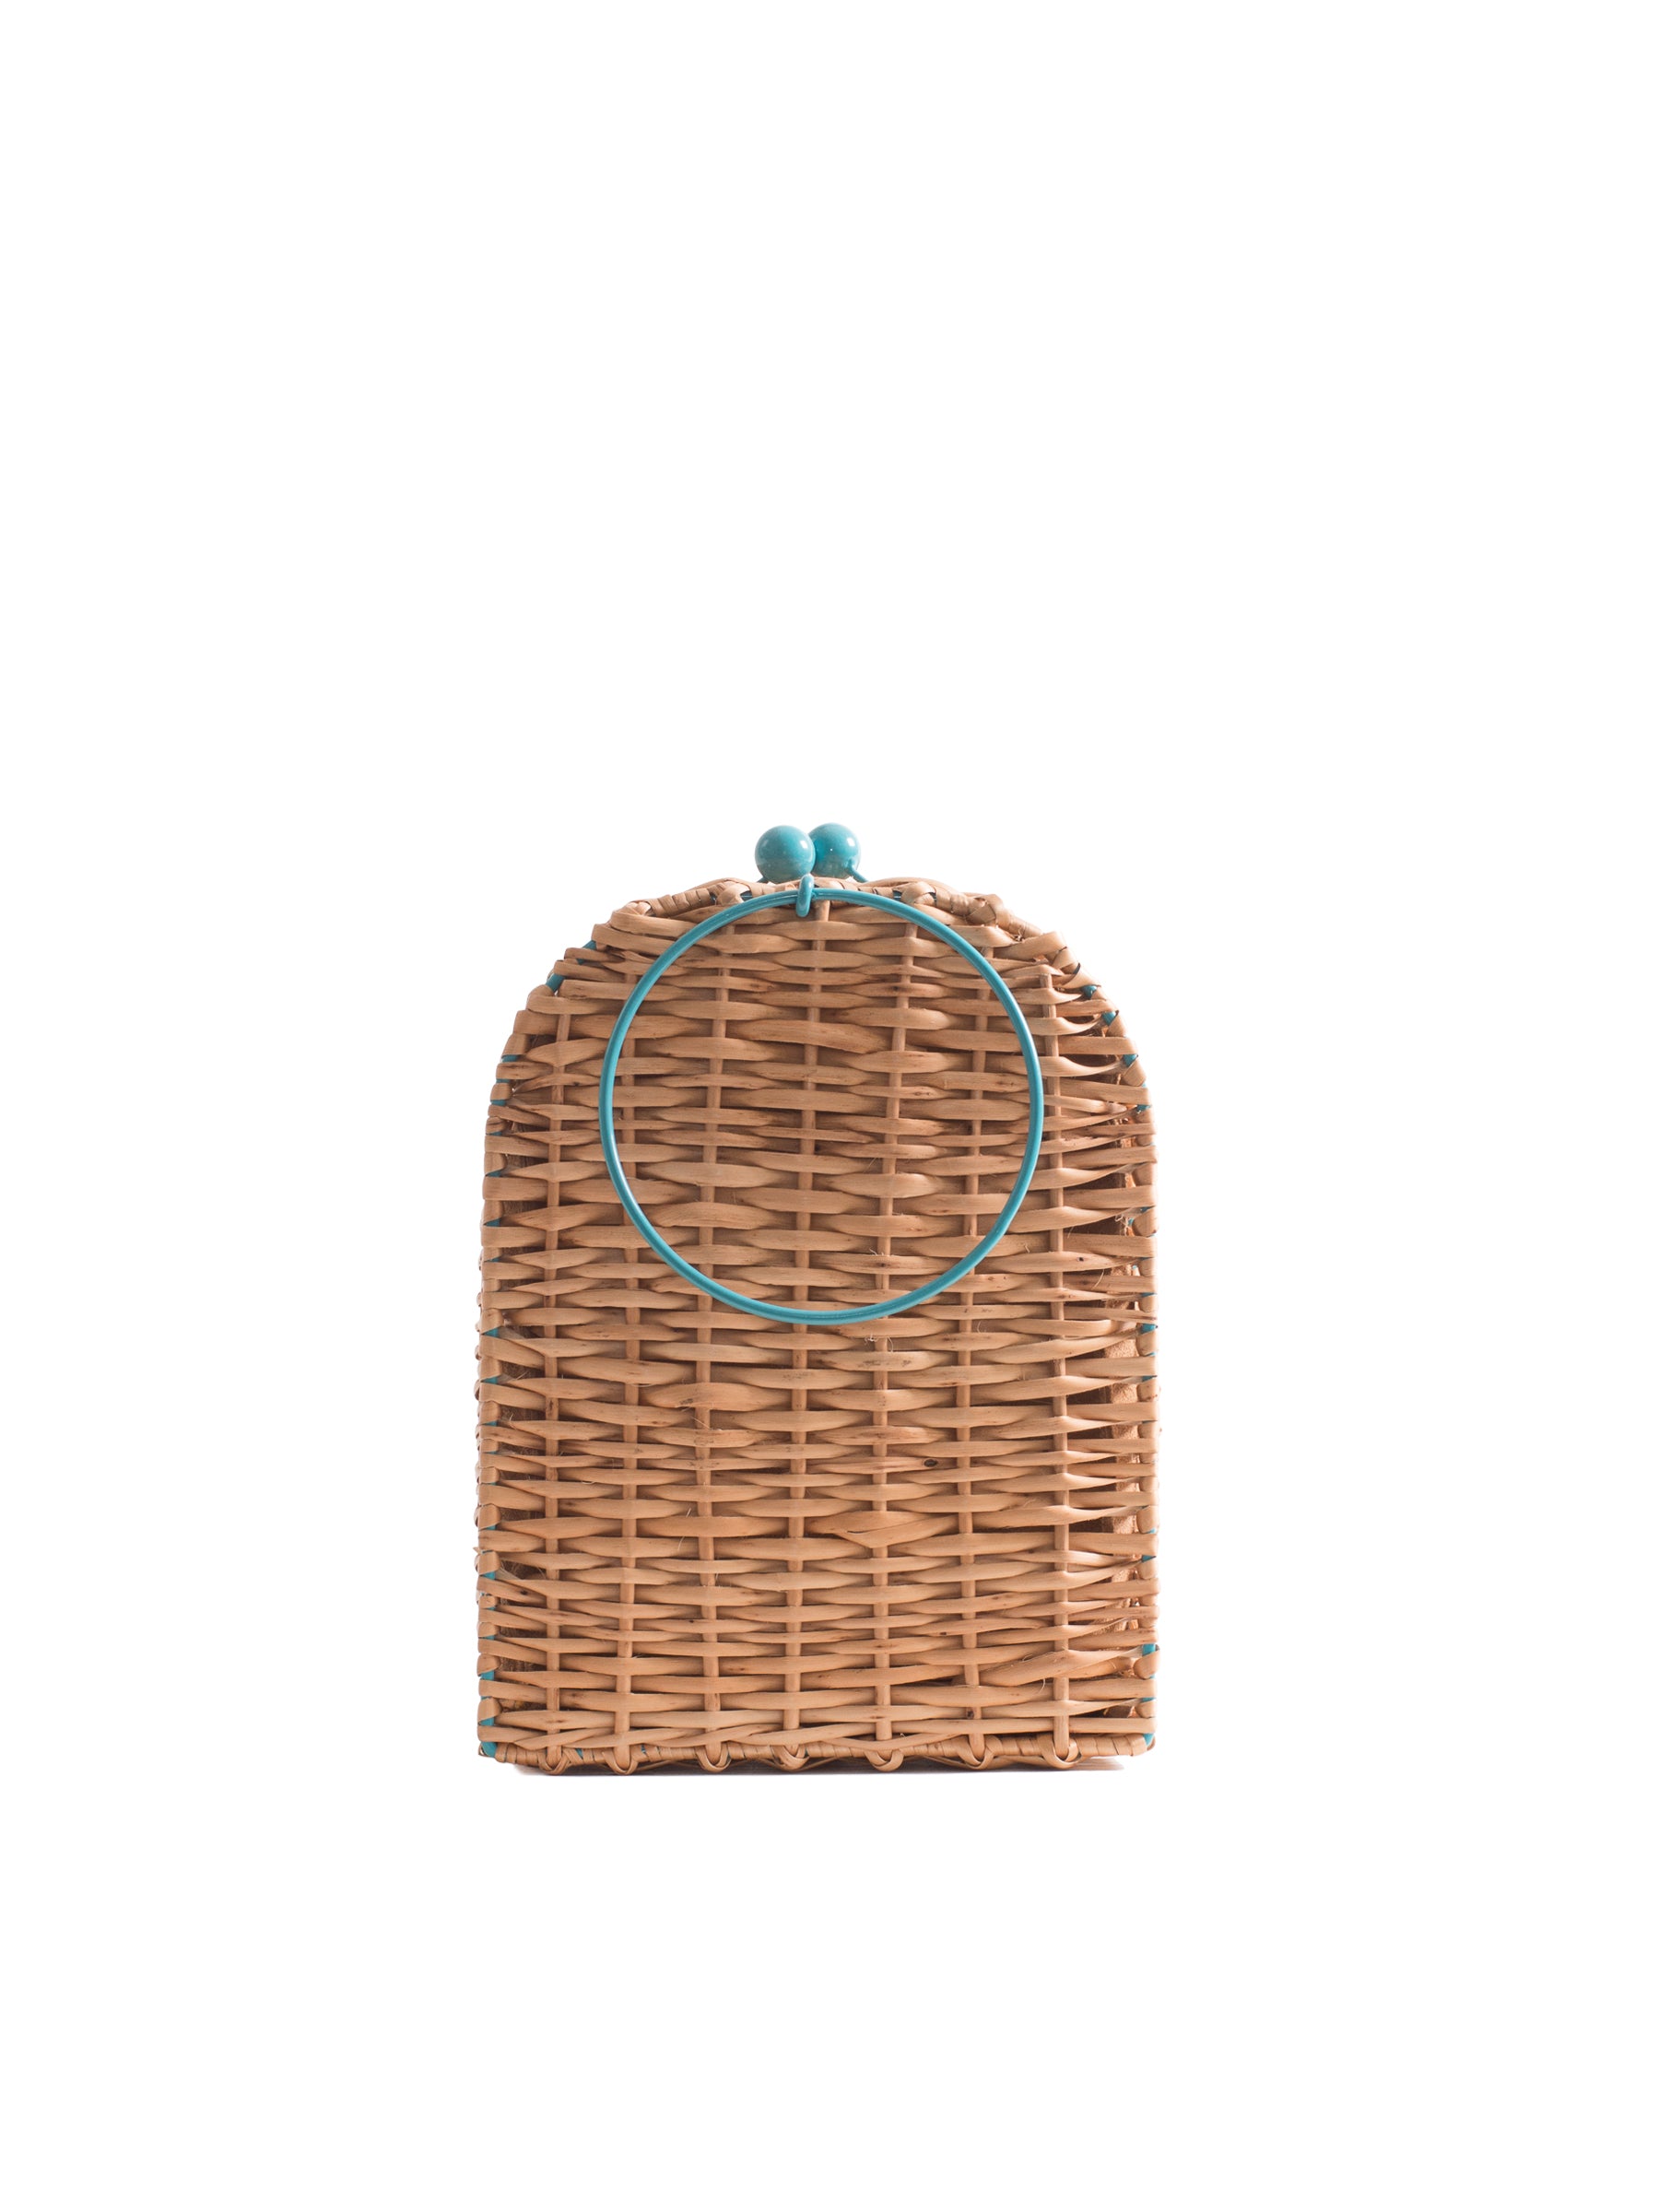 INTO THE BLUE WICKER BAG TALL